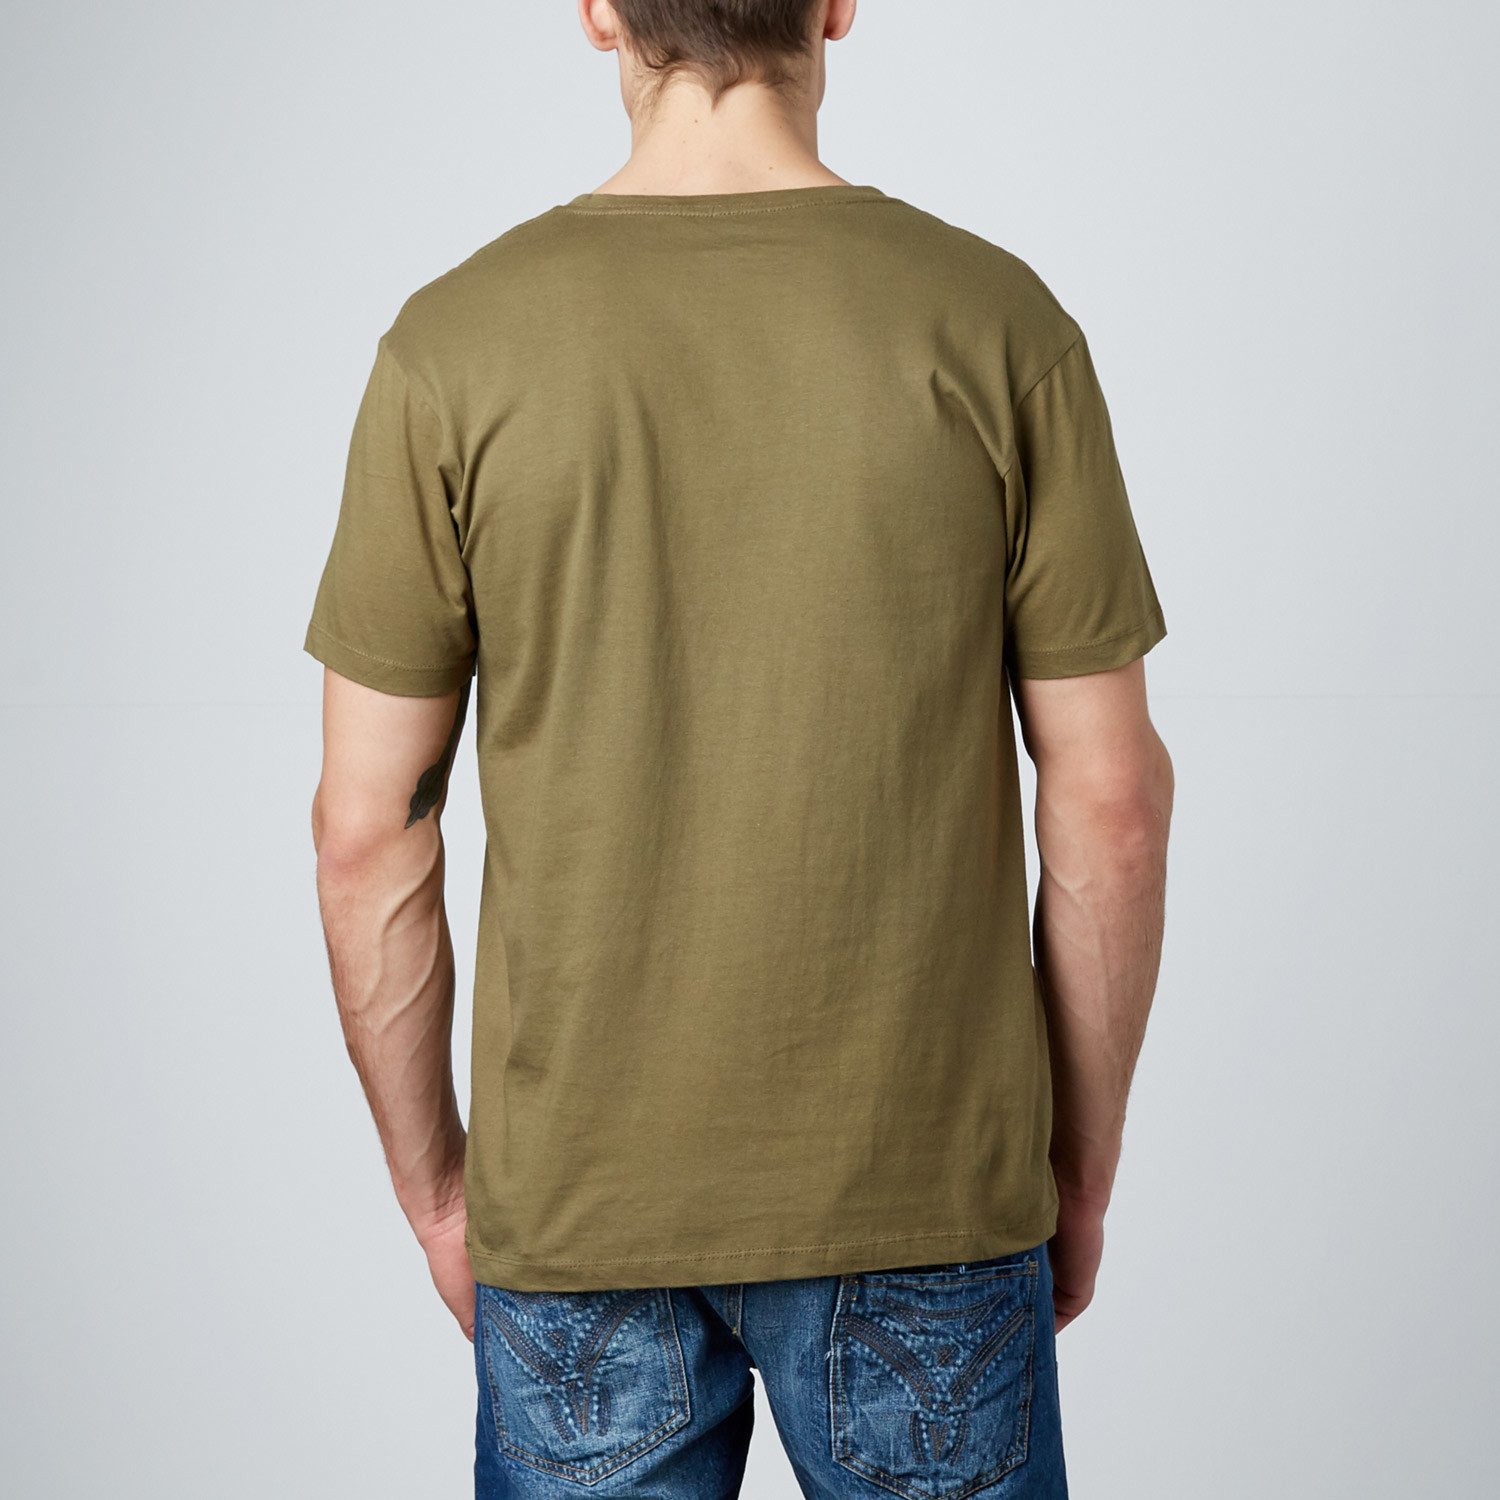  Combed  Cotton  Tee Military S J Taverniti Touch 